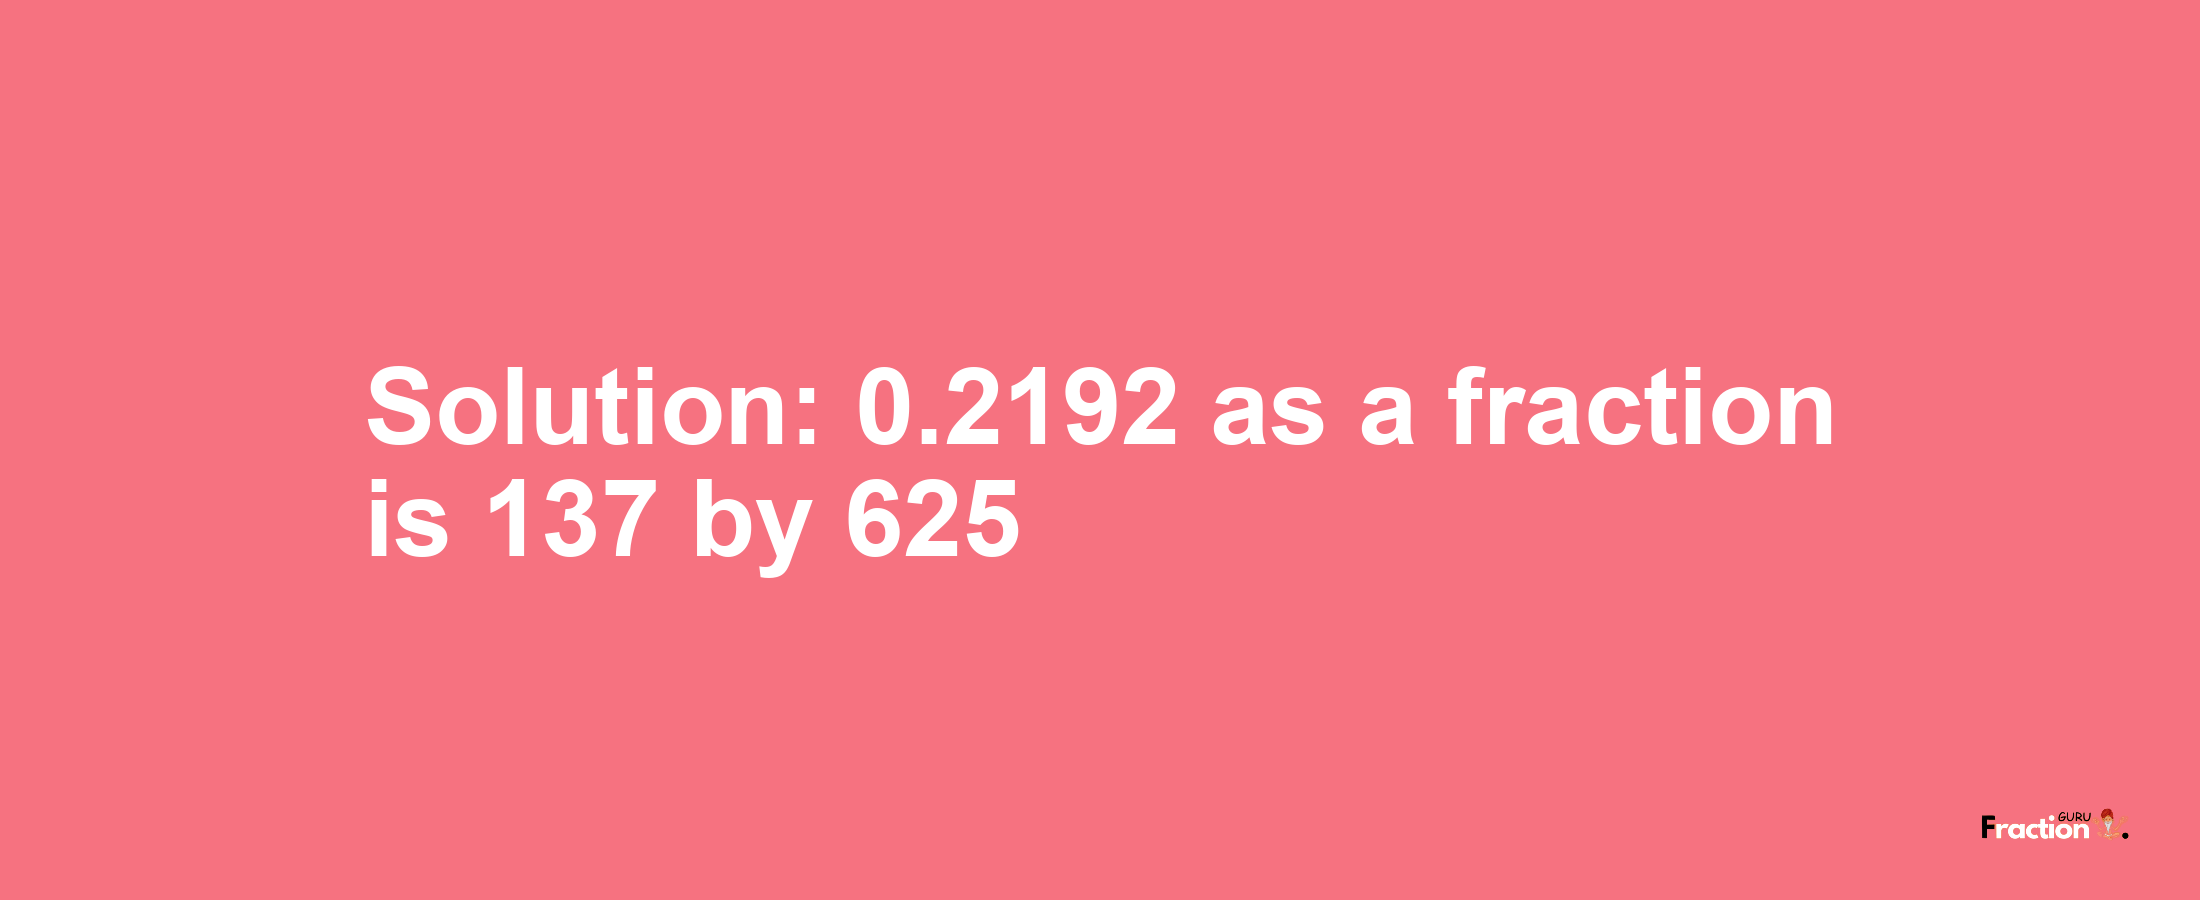 Solution:0.2192 as a fraction is 137/625